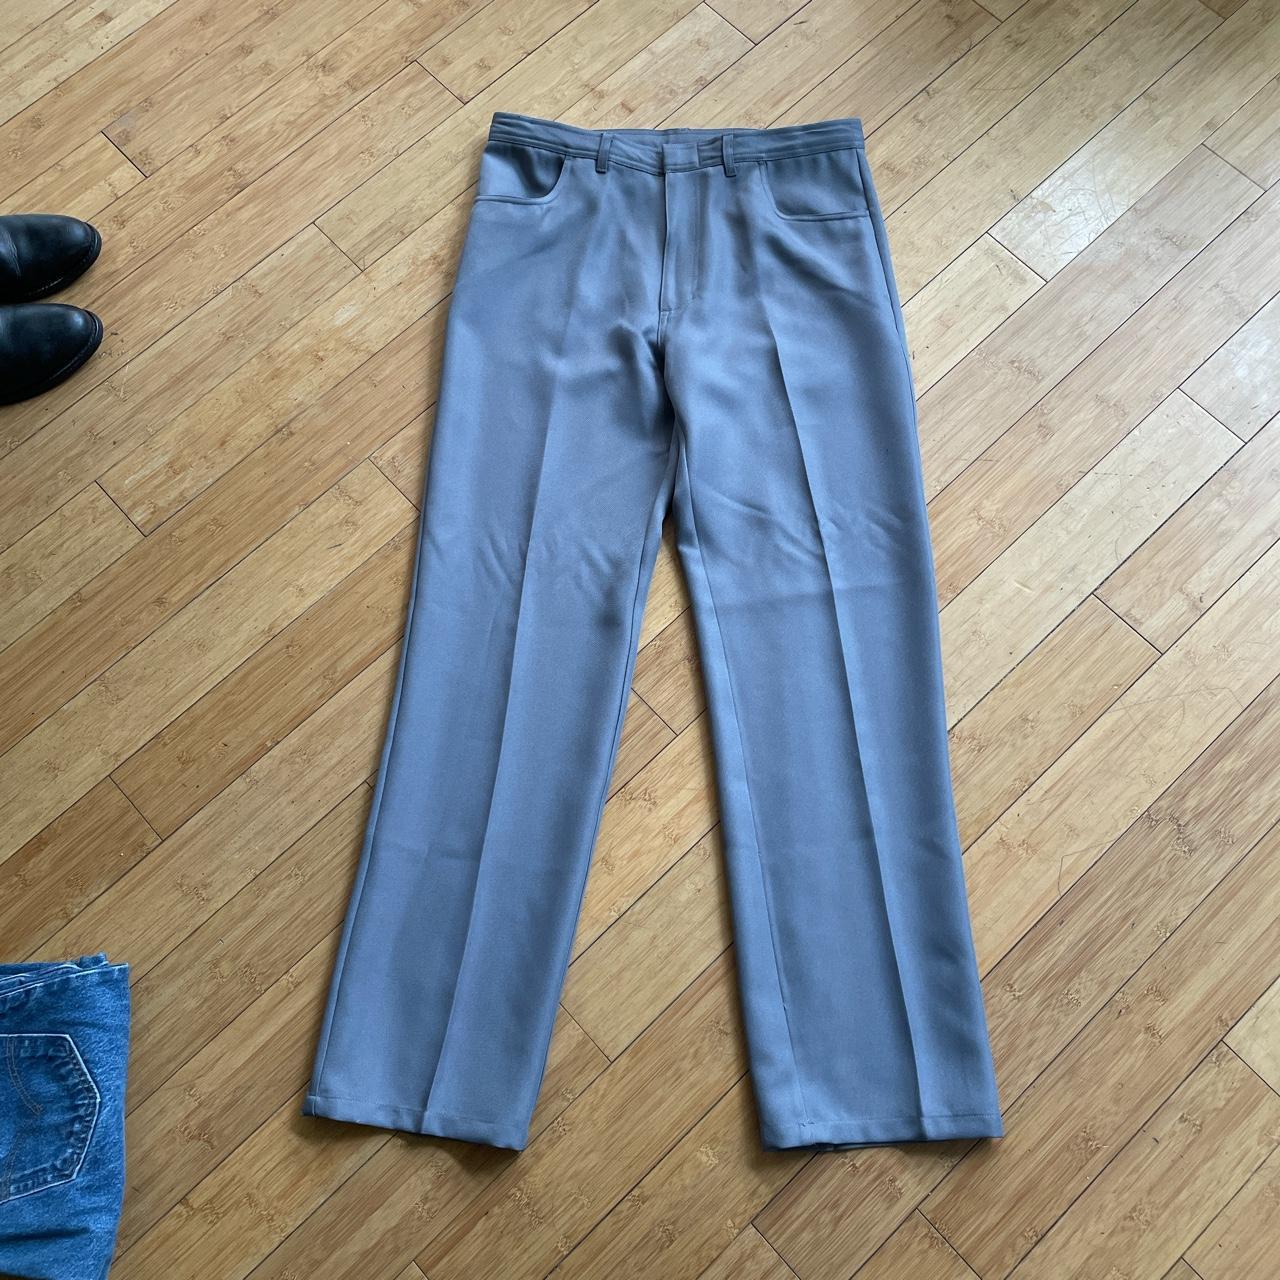 Blair Men's Grey and Blue Trousers (2)